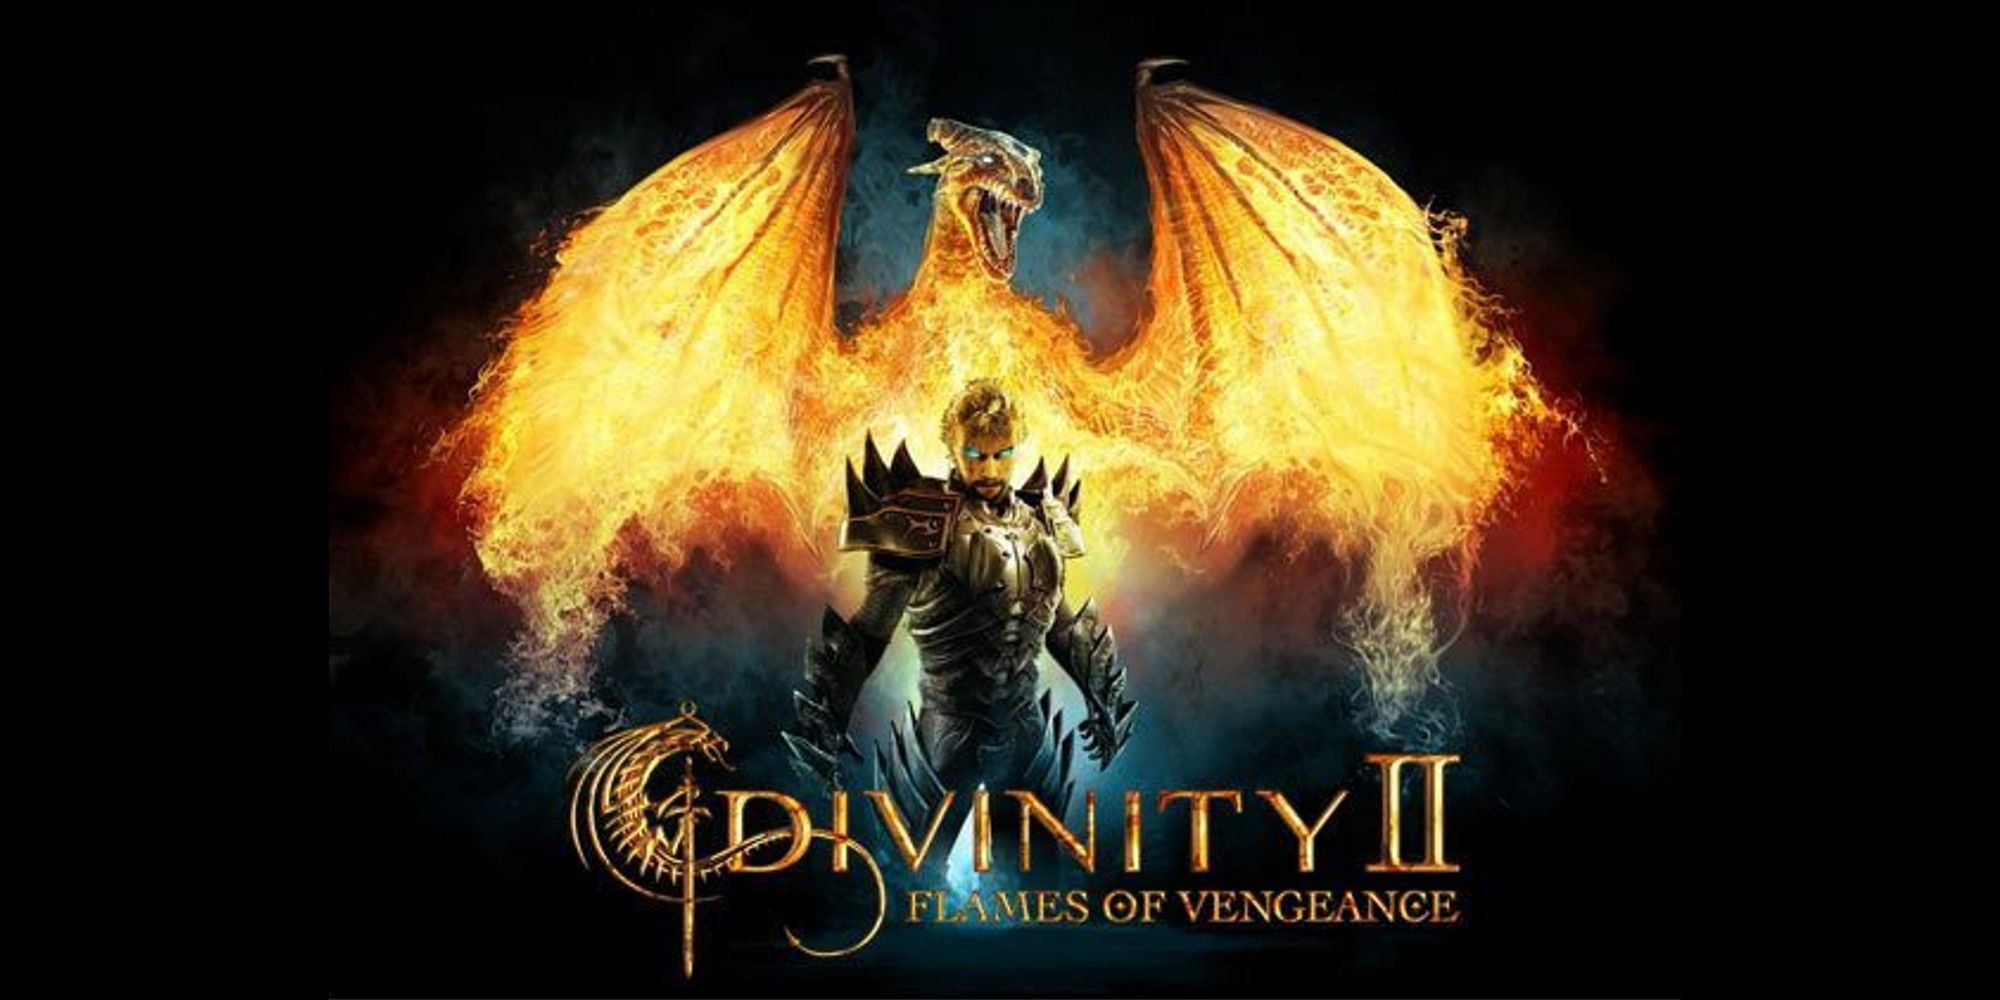 Divinity 2 Flames of Vengeance, warrior standing inf front of a dragon made of fire